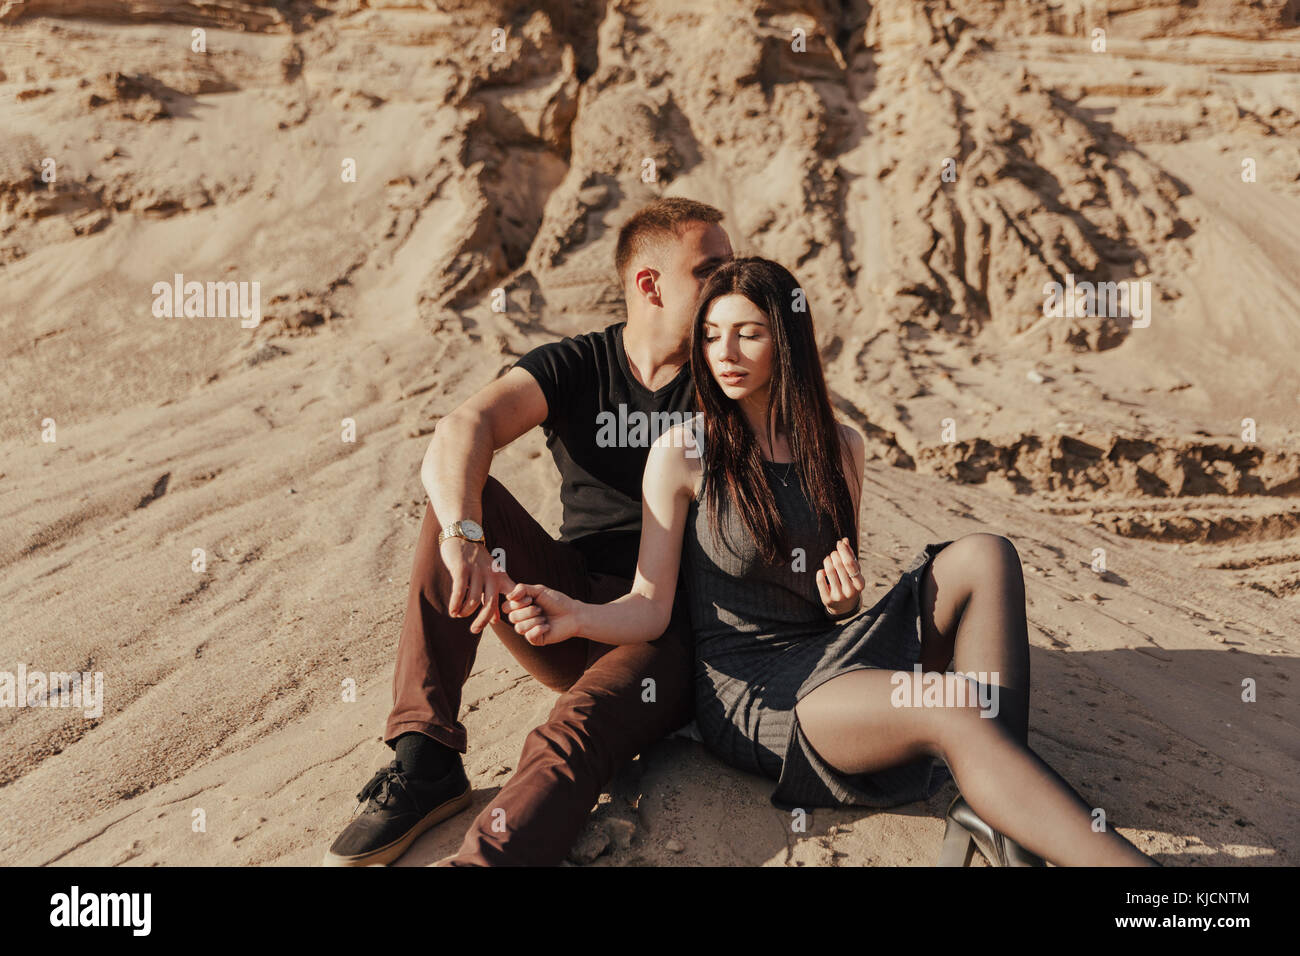 Middle Eastern couple sitting in desert Stock Photo